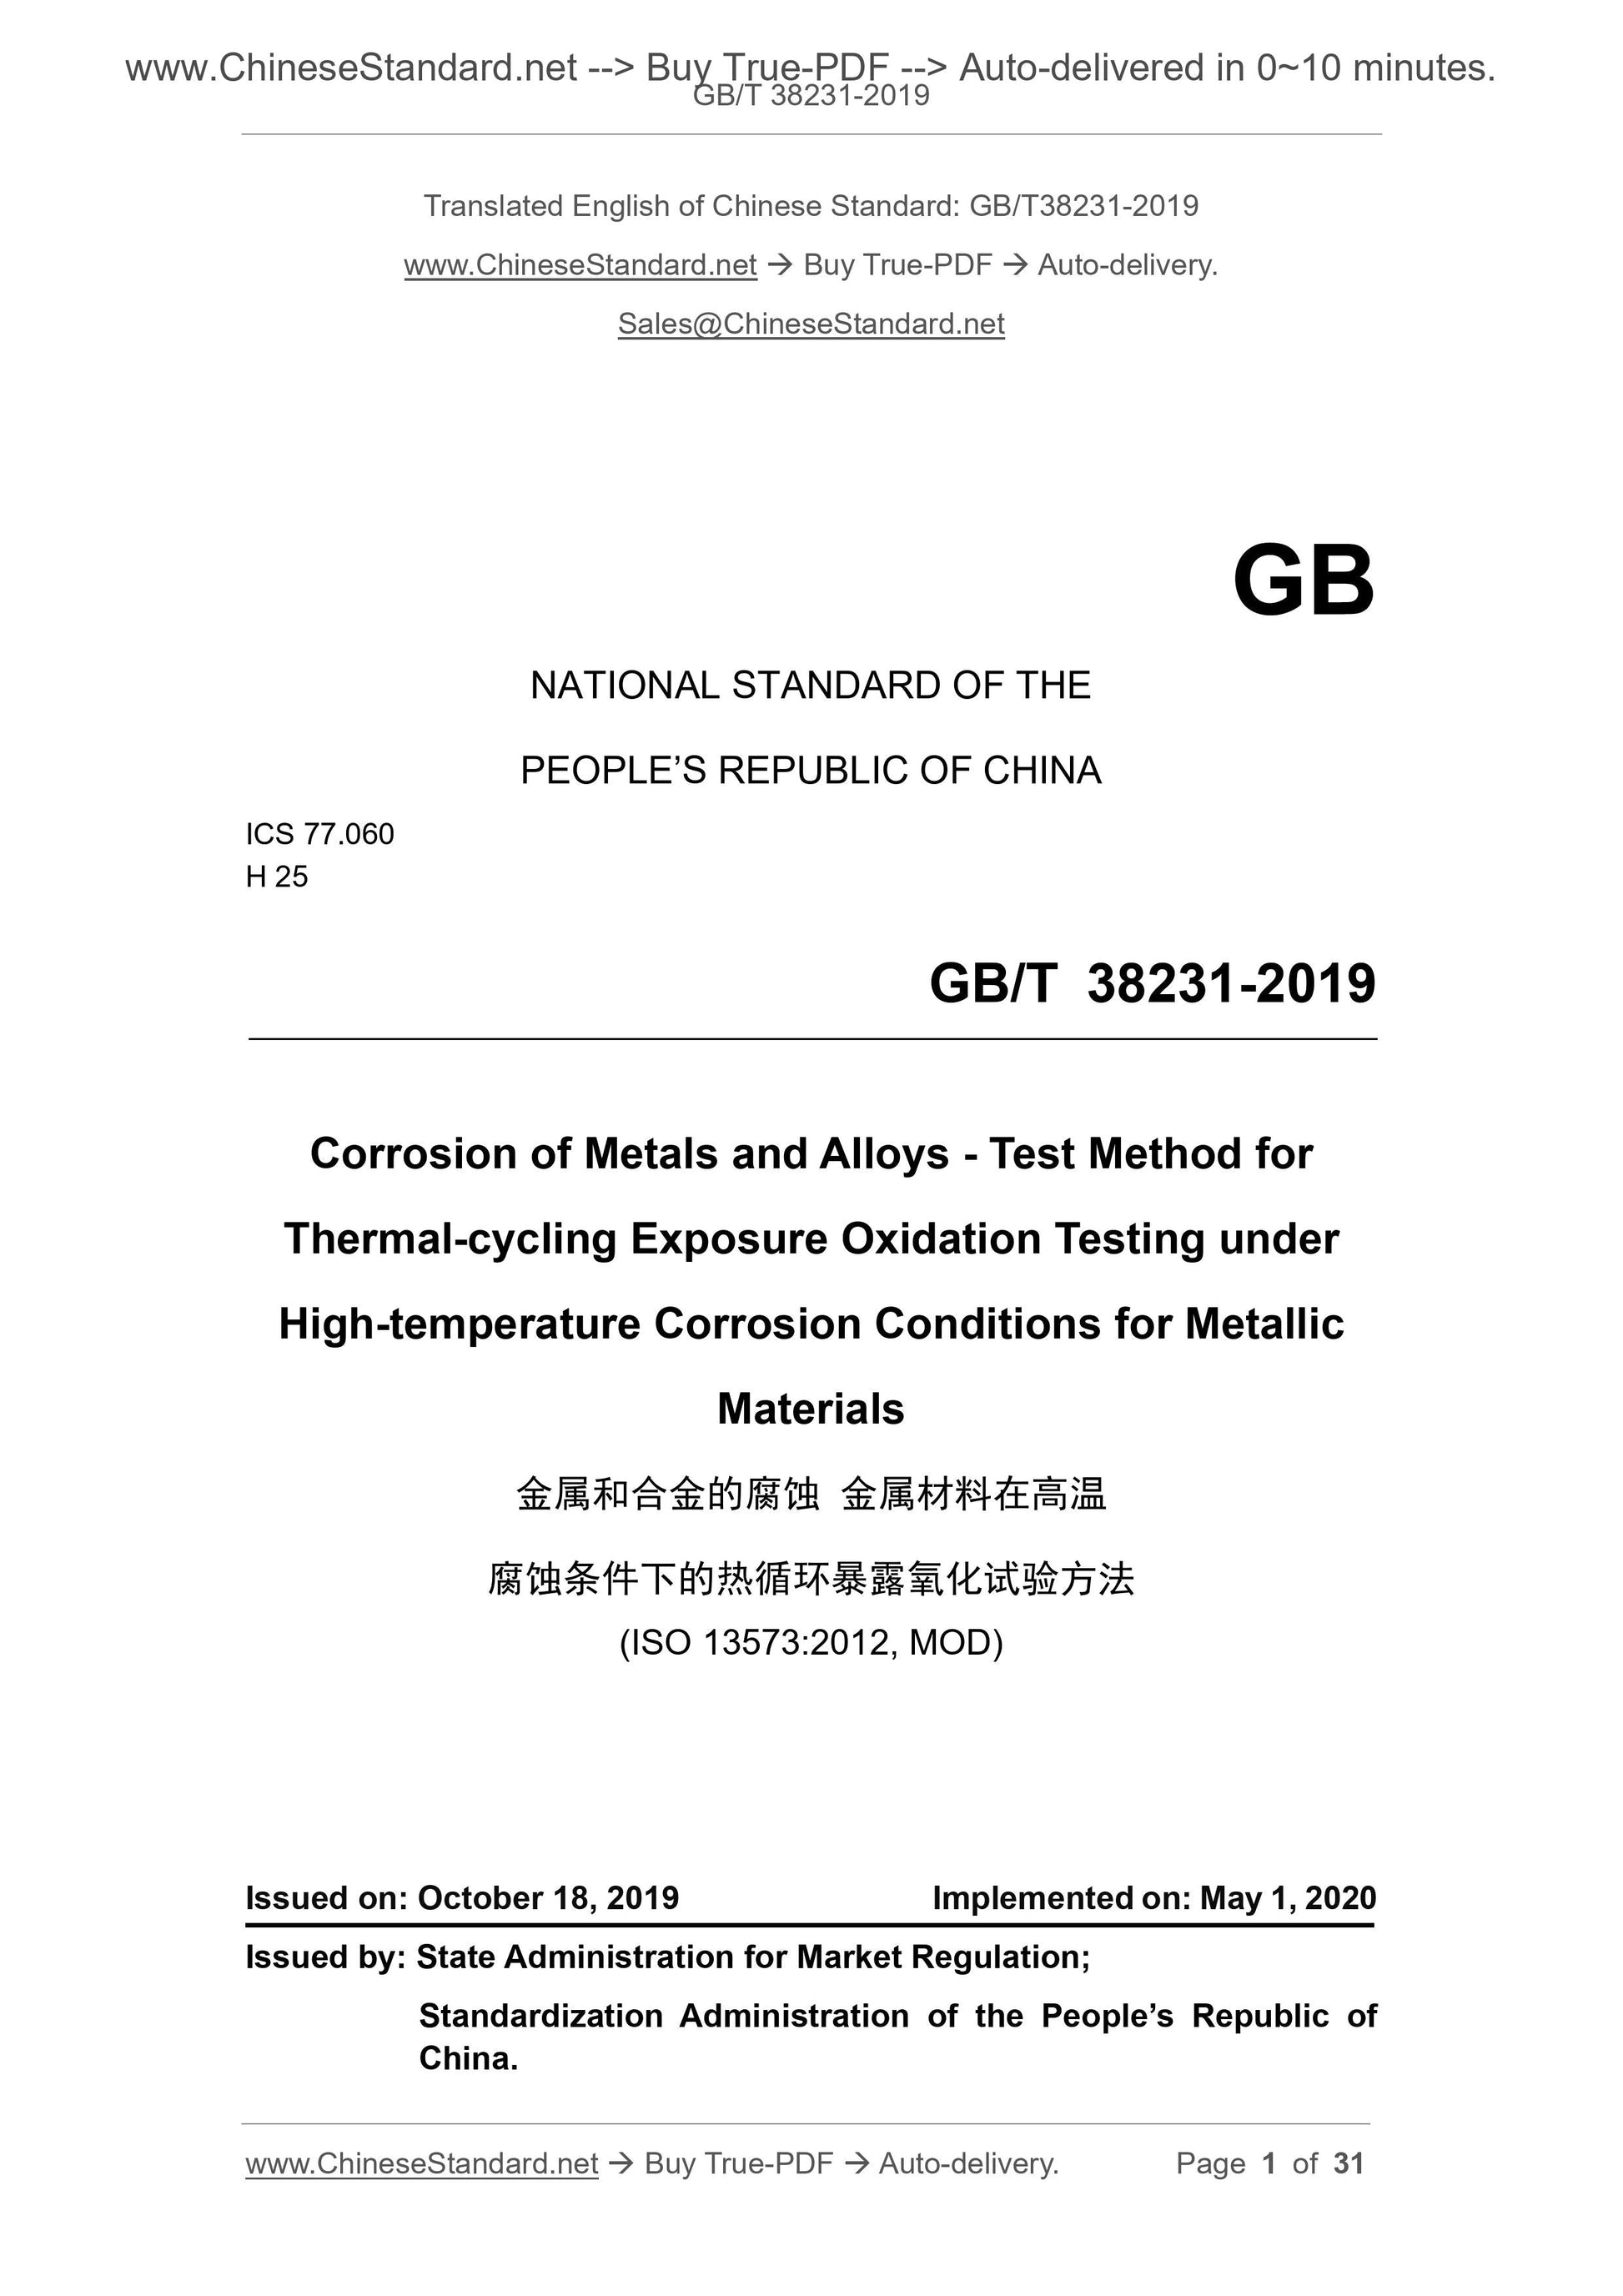 GB/T 38231-2019 Page 1